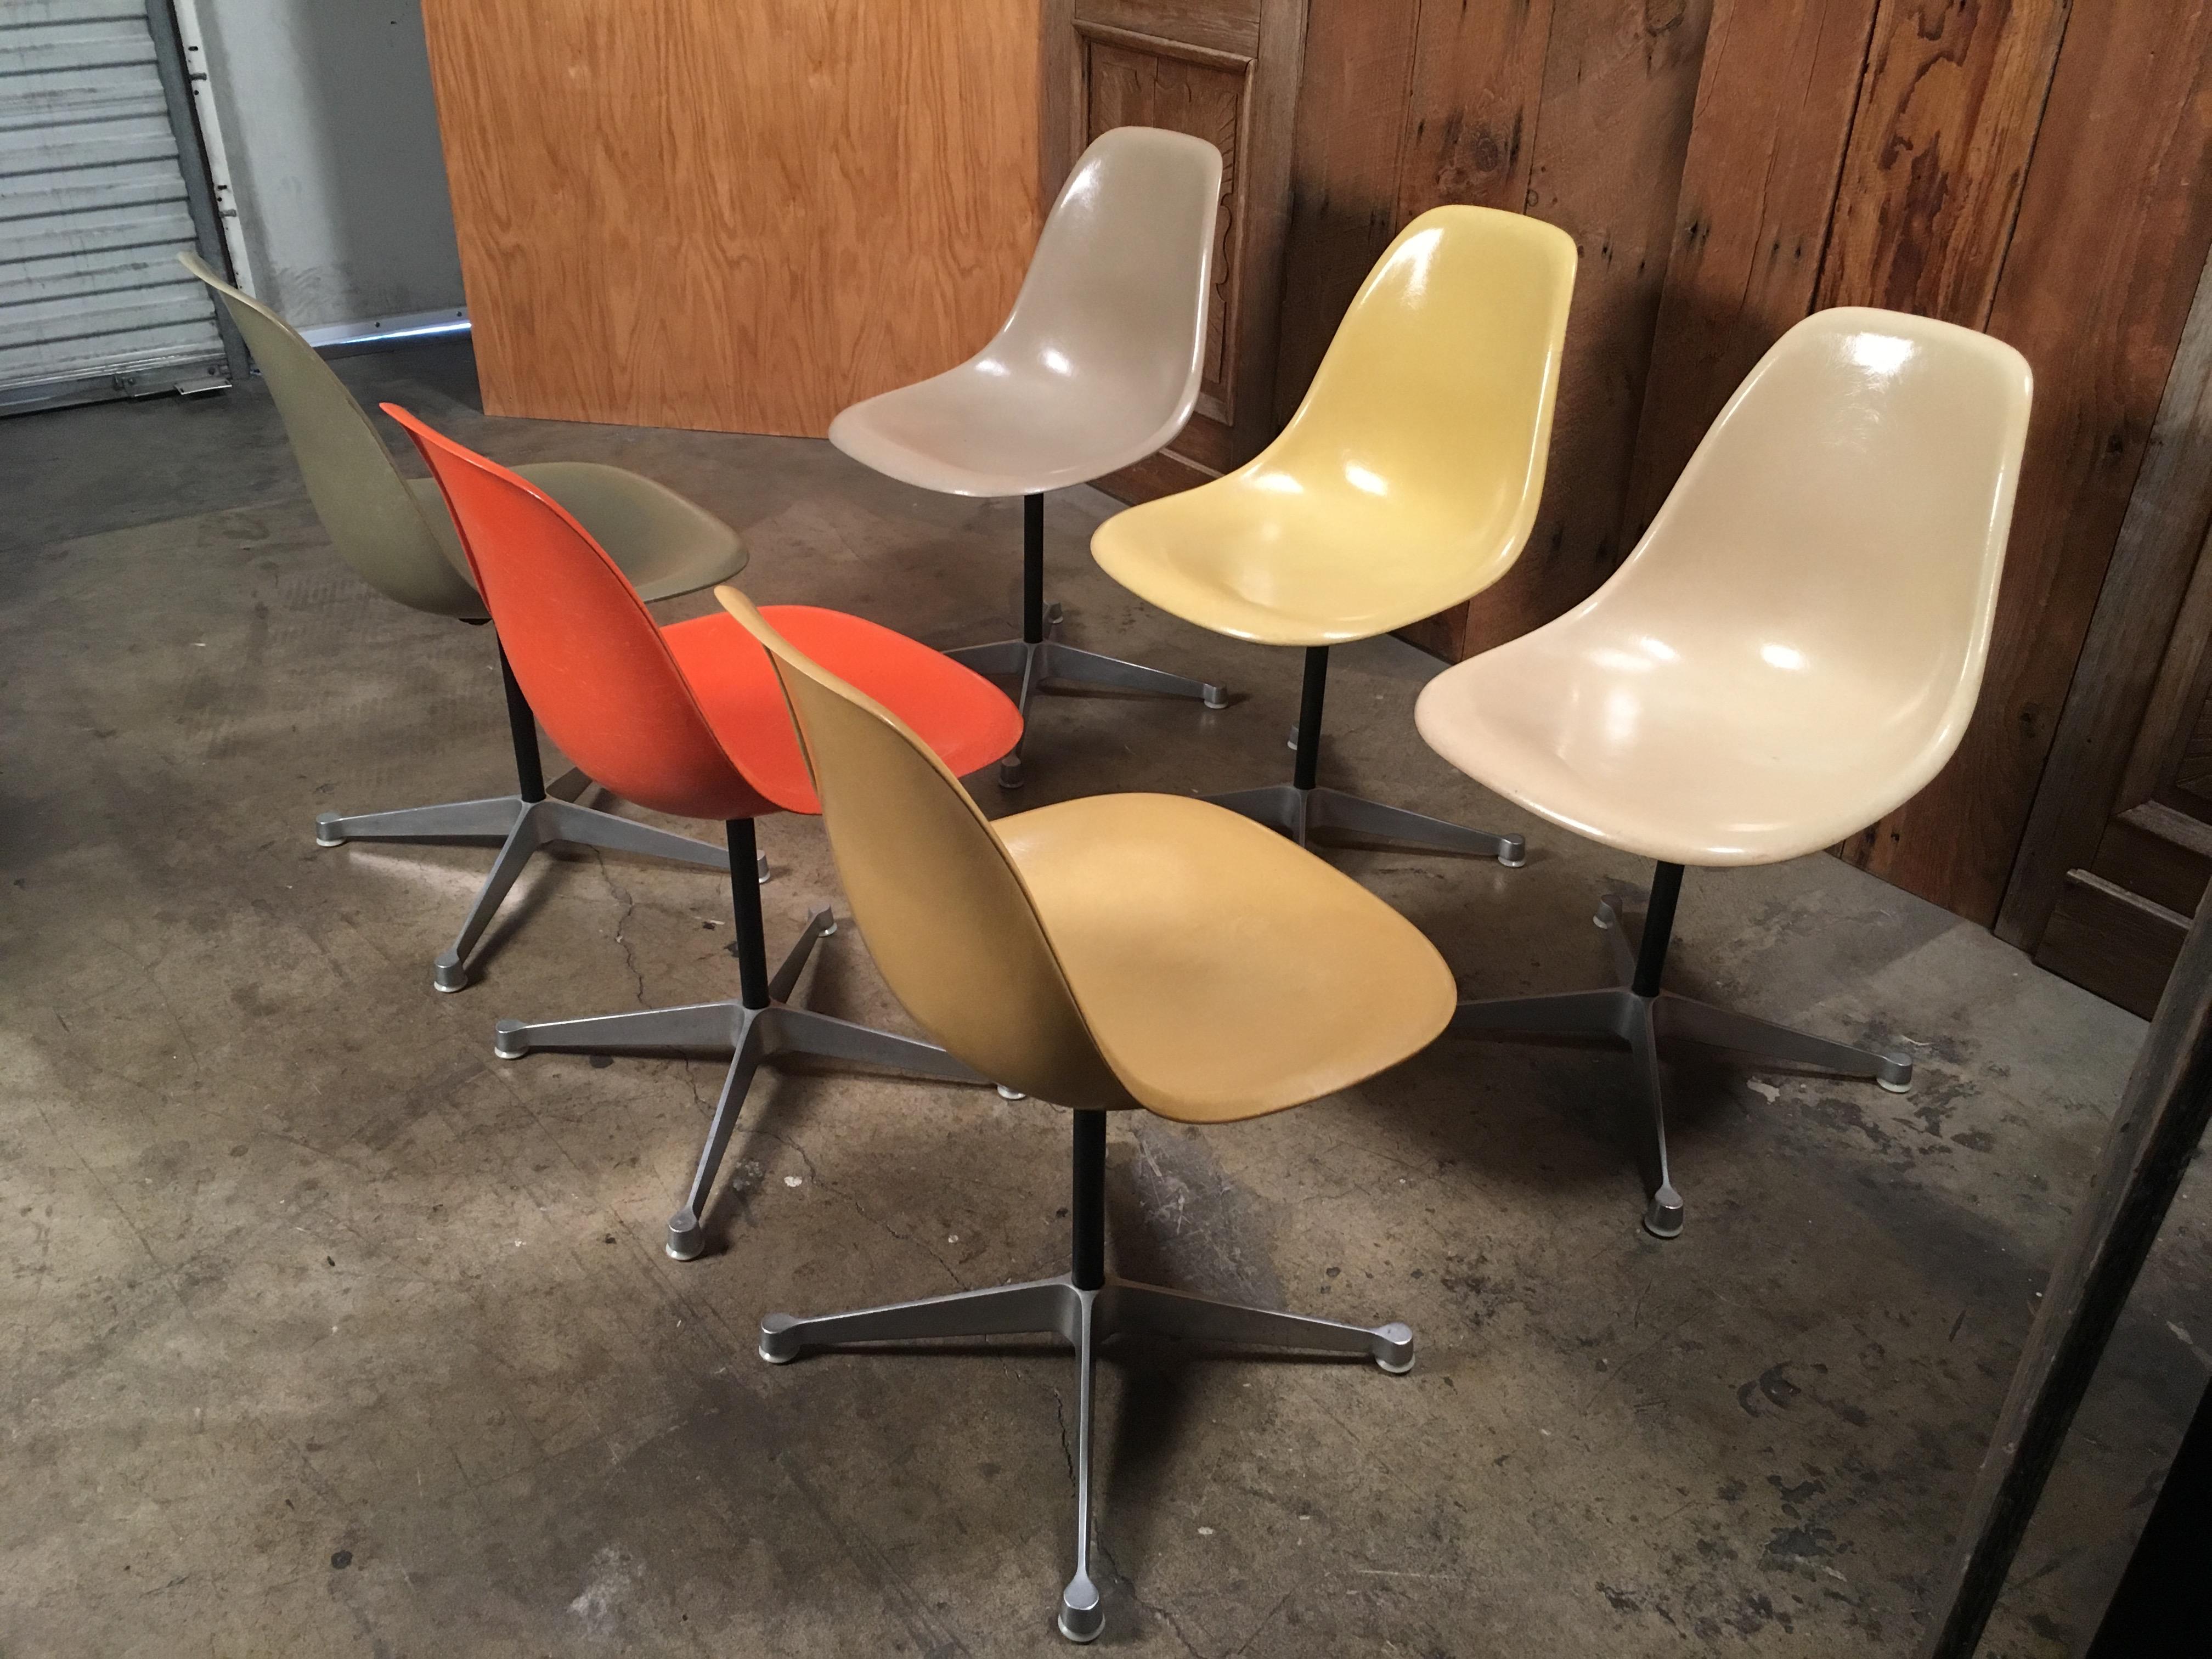 Aluminum Multicolored Fiberglass Shell Chairs, Charles Eames for Herman Miller